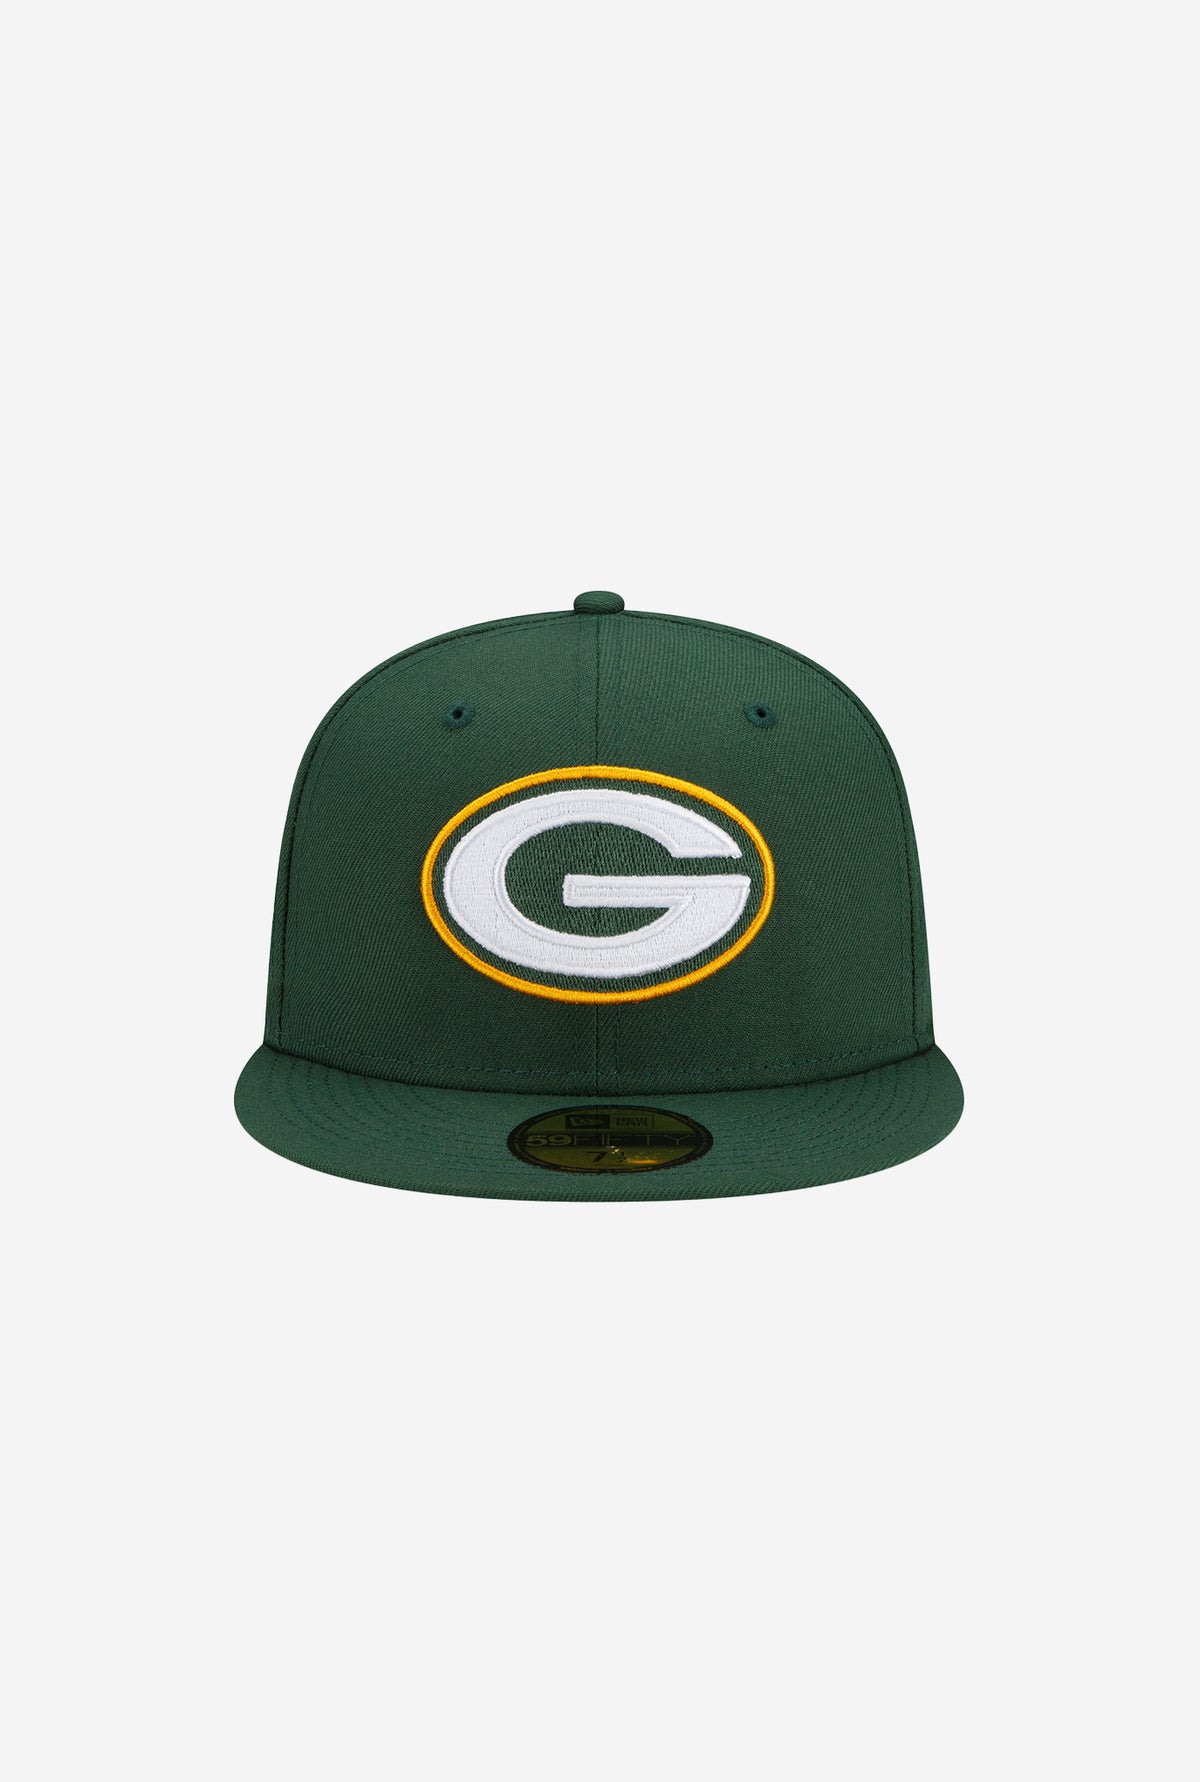 Green Bay Packers 59FIFTY Super Bowl XXXI Side Patch